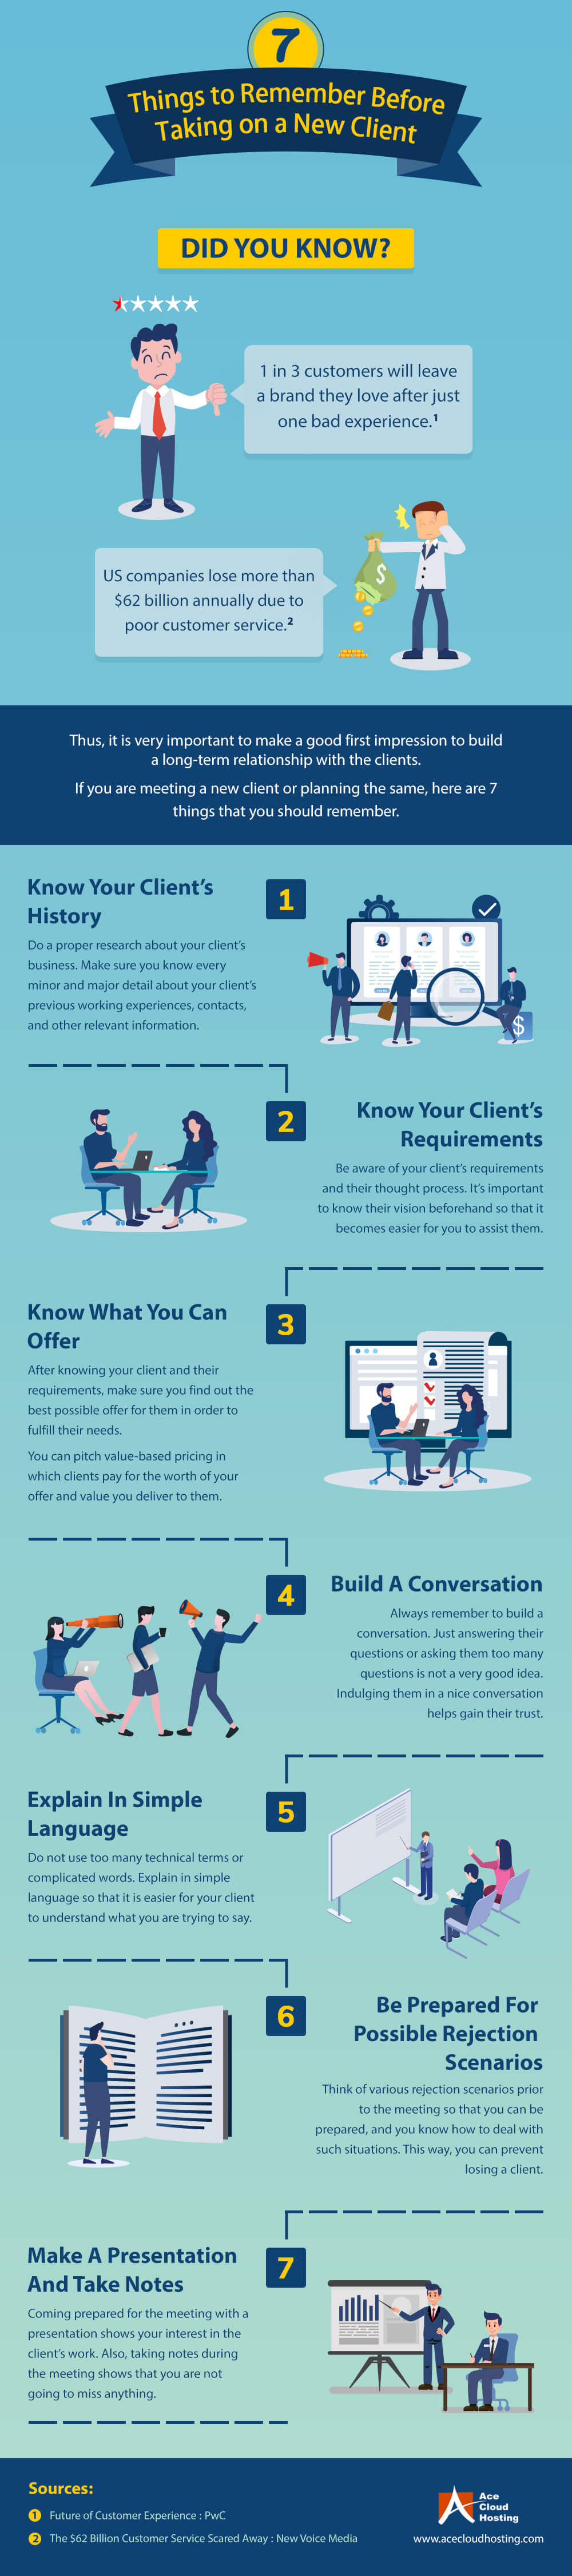 7 Things to Remember Before Taking on a New Client [Infographic]